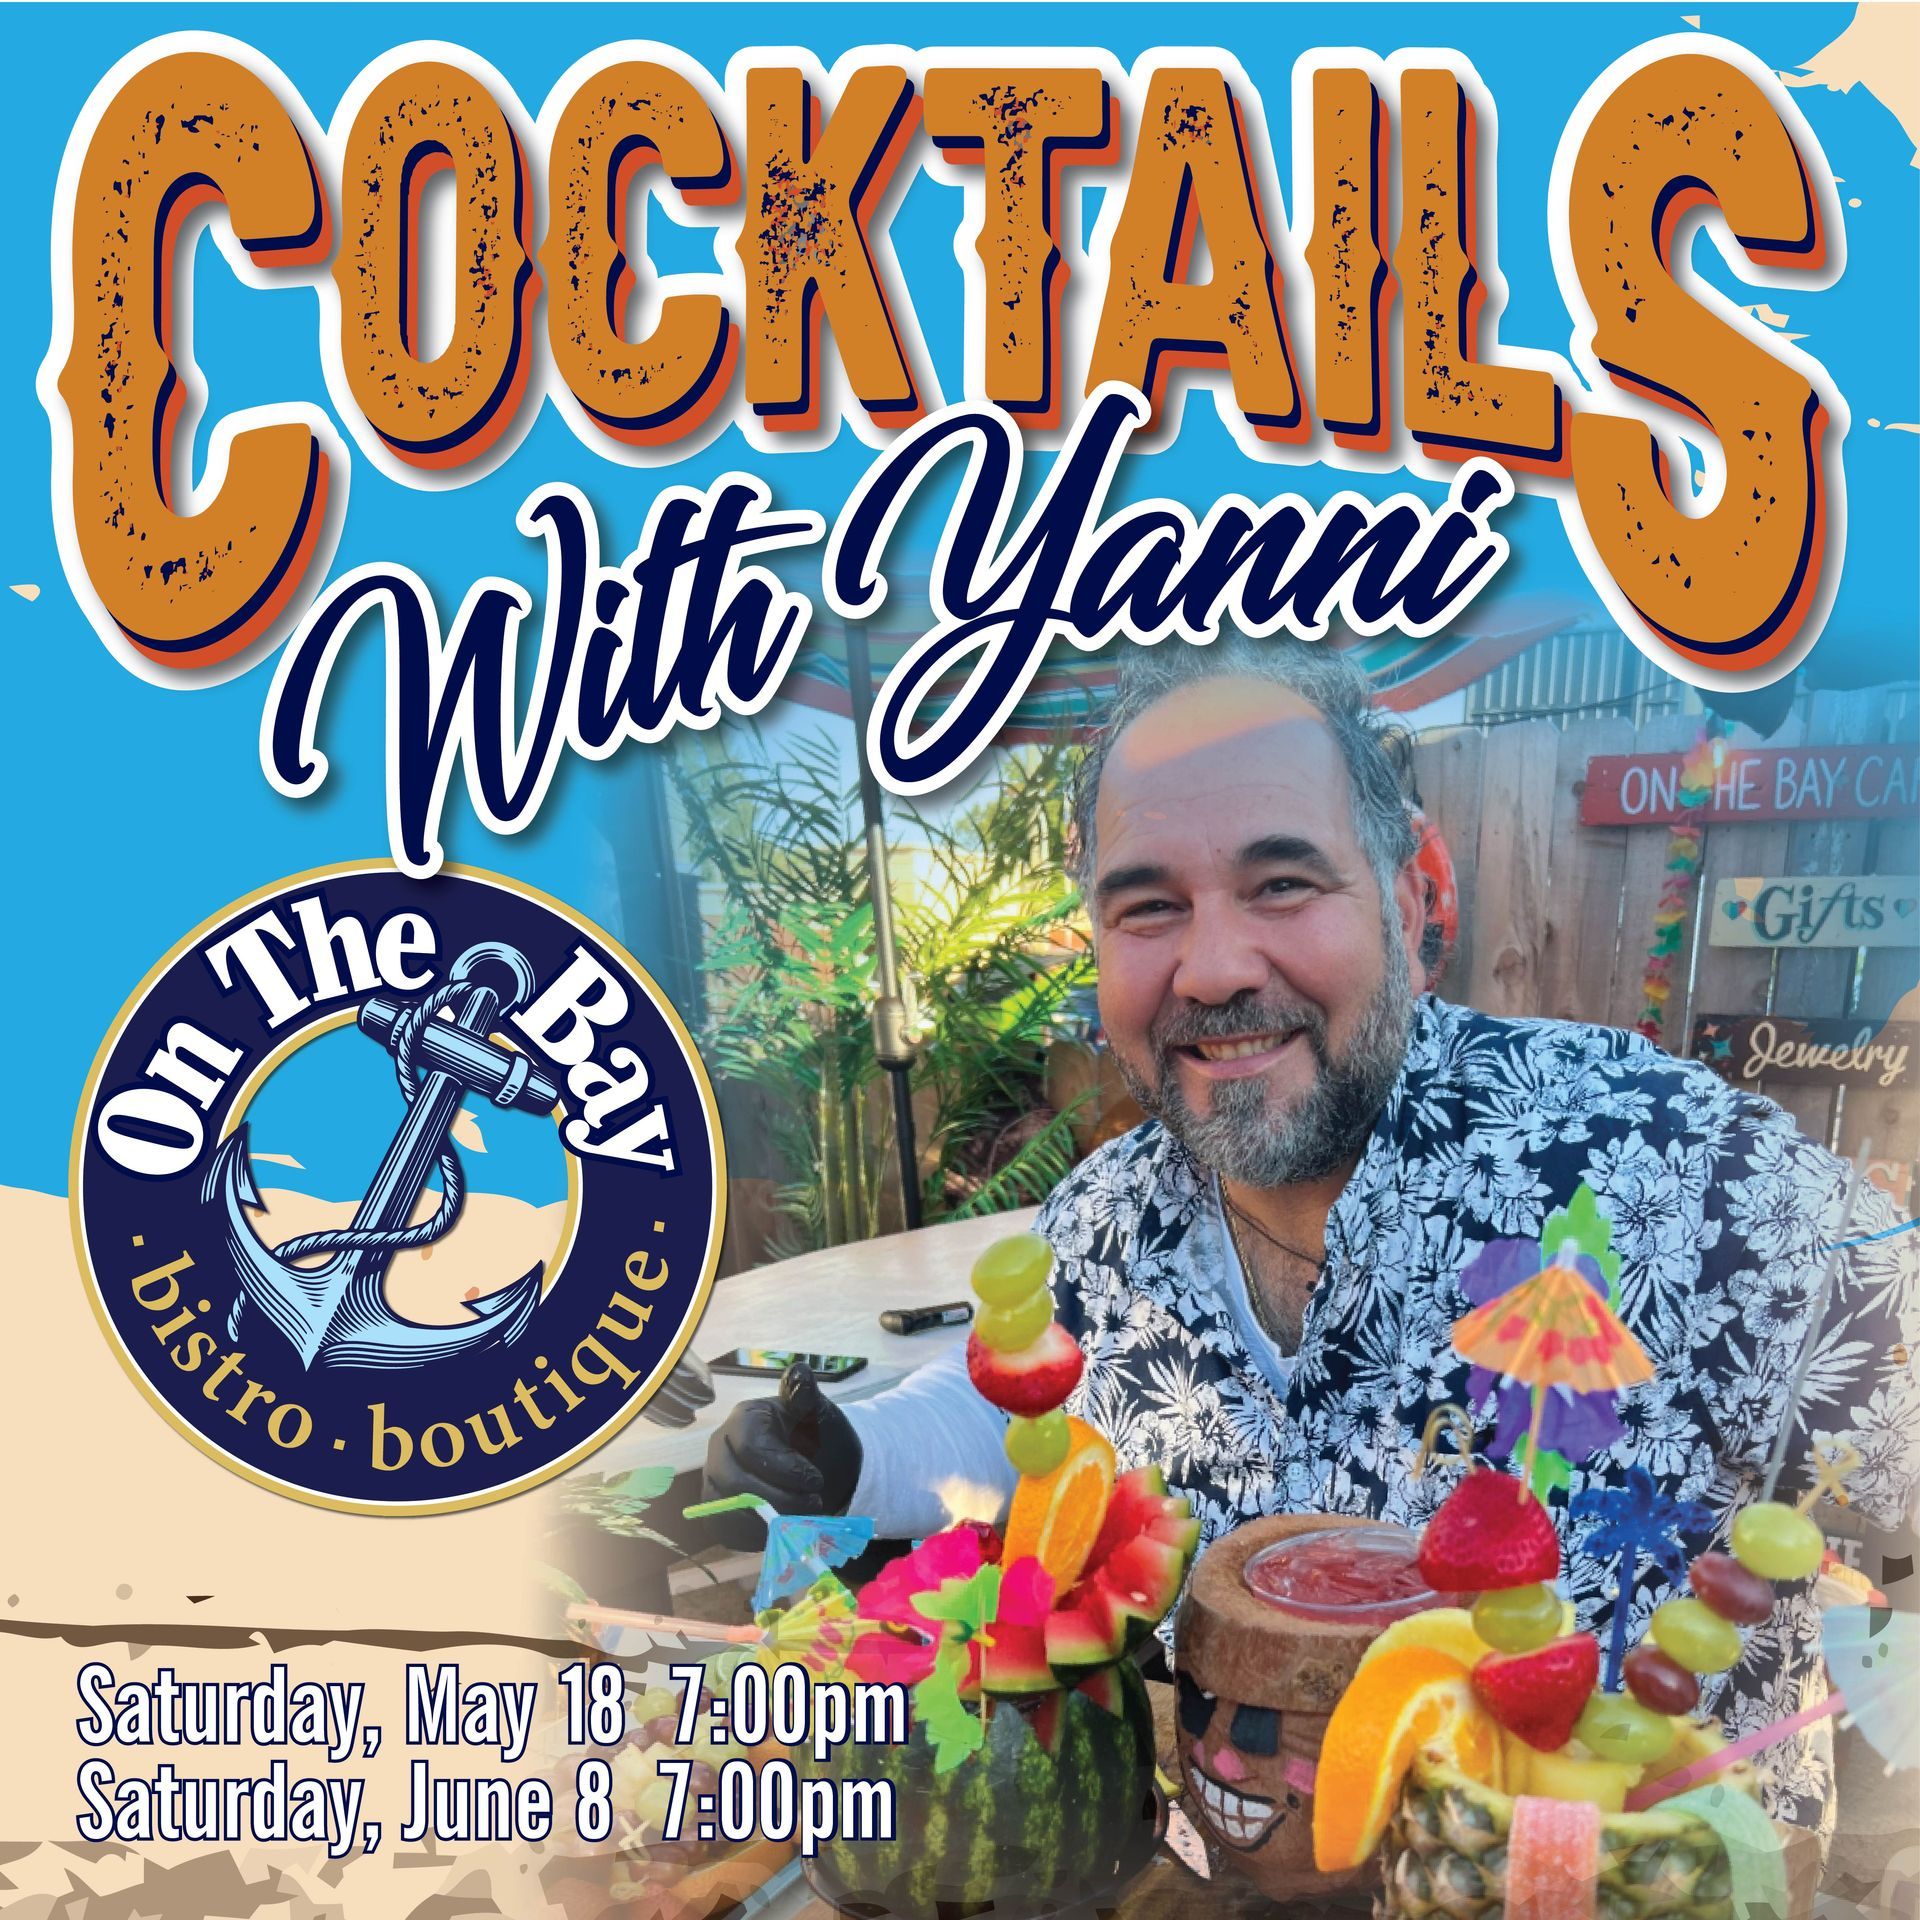 Summer fun with fruit carving artist Yanni at On The Bay tropical tiki bar